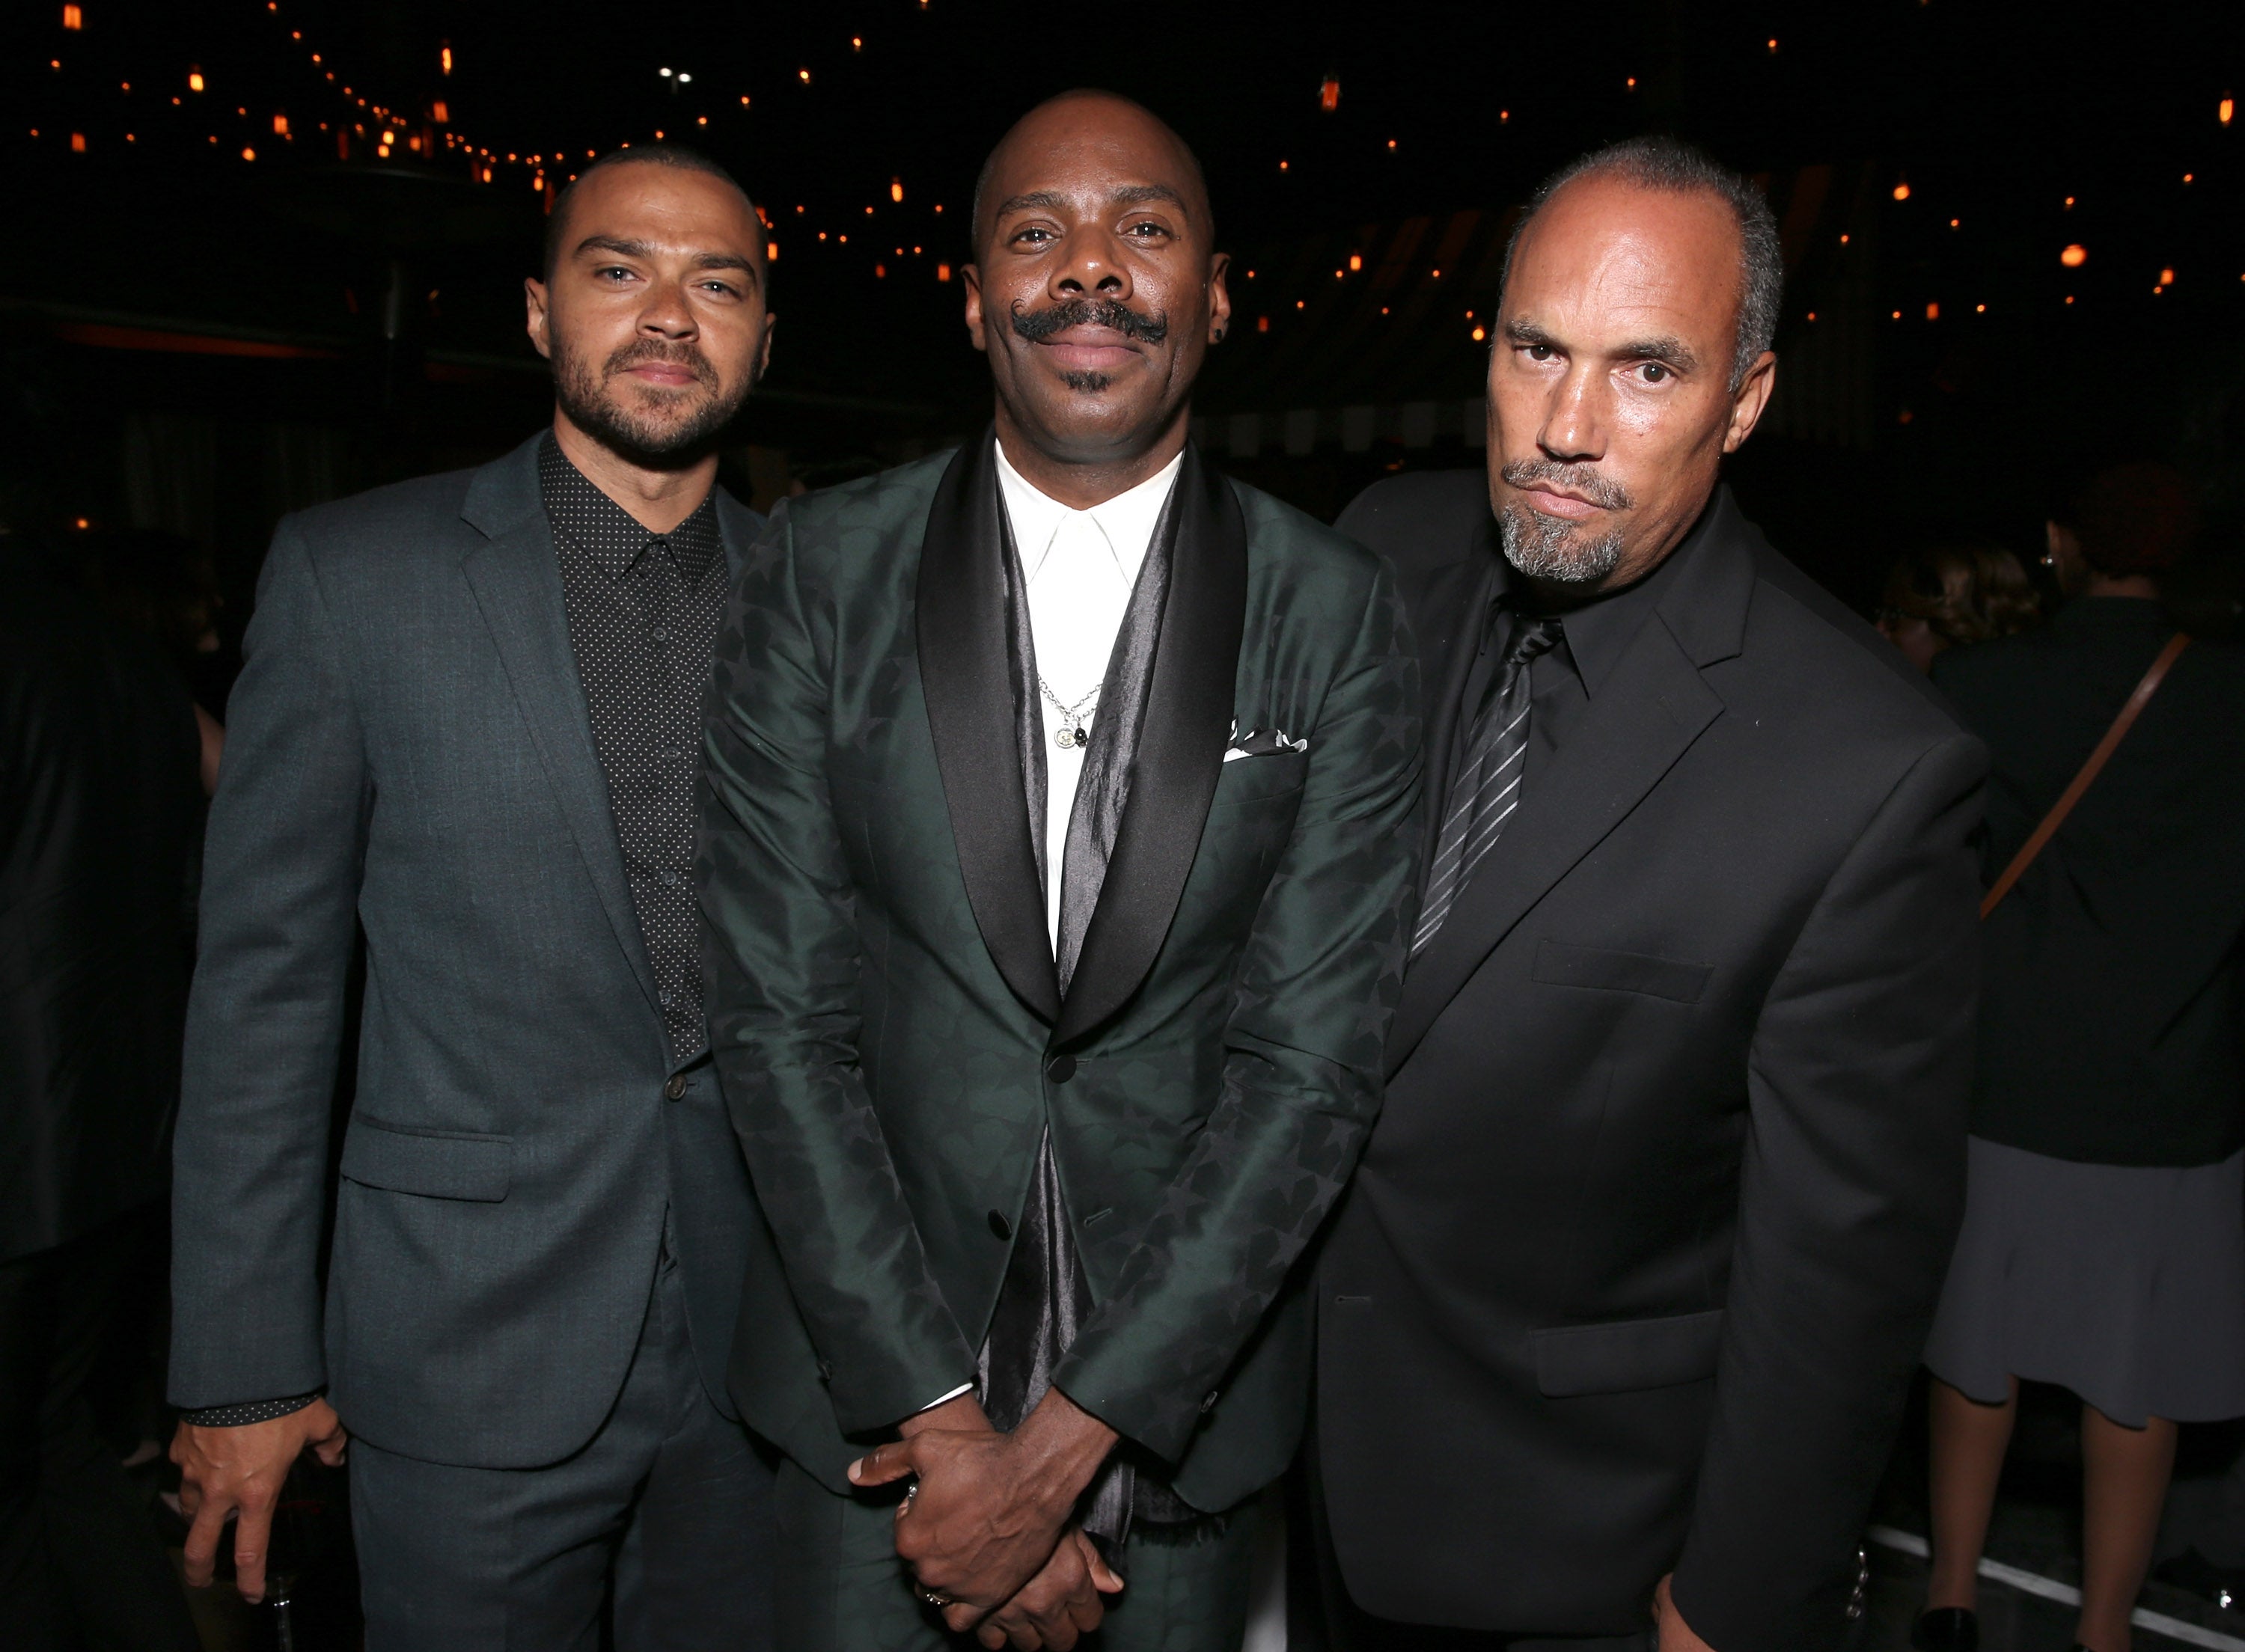 Celebs Come Out to Support "The Birth of a Nation" Premiere
